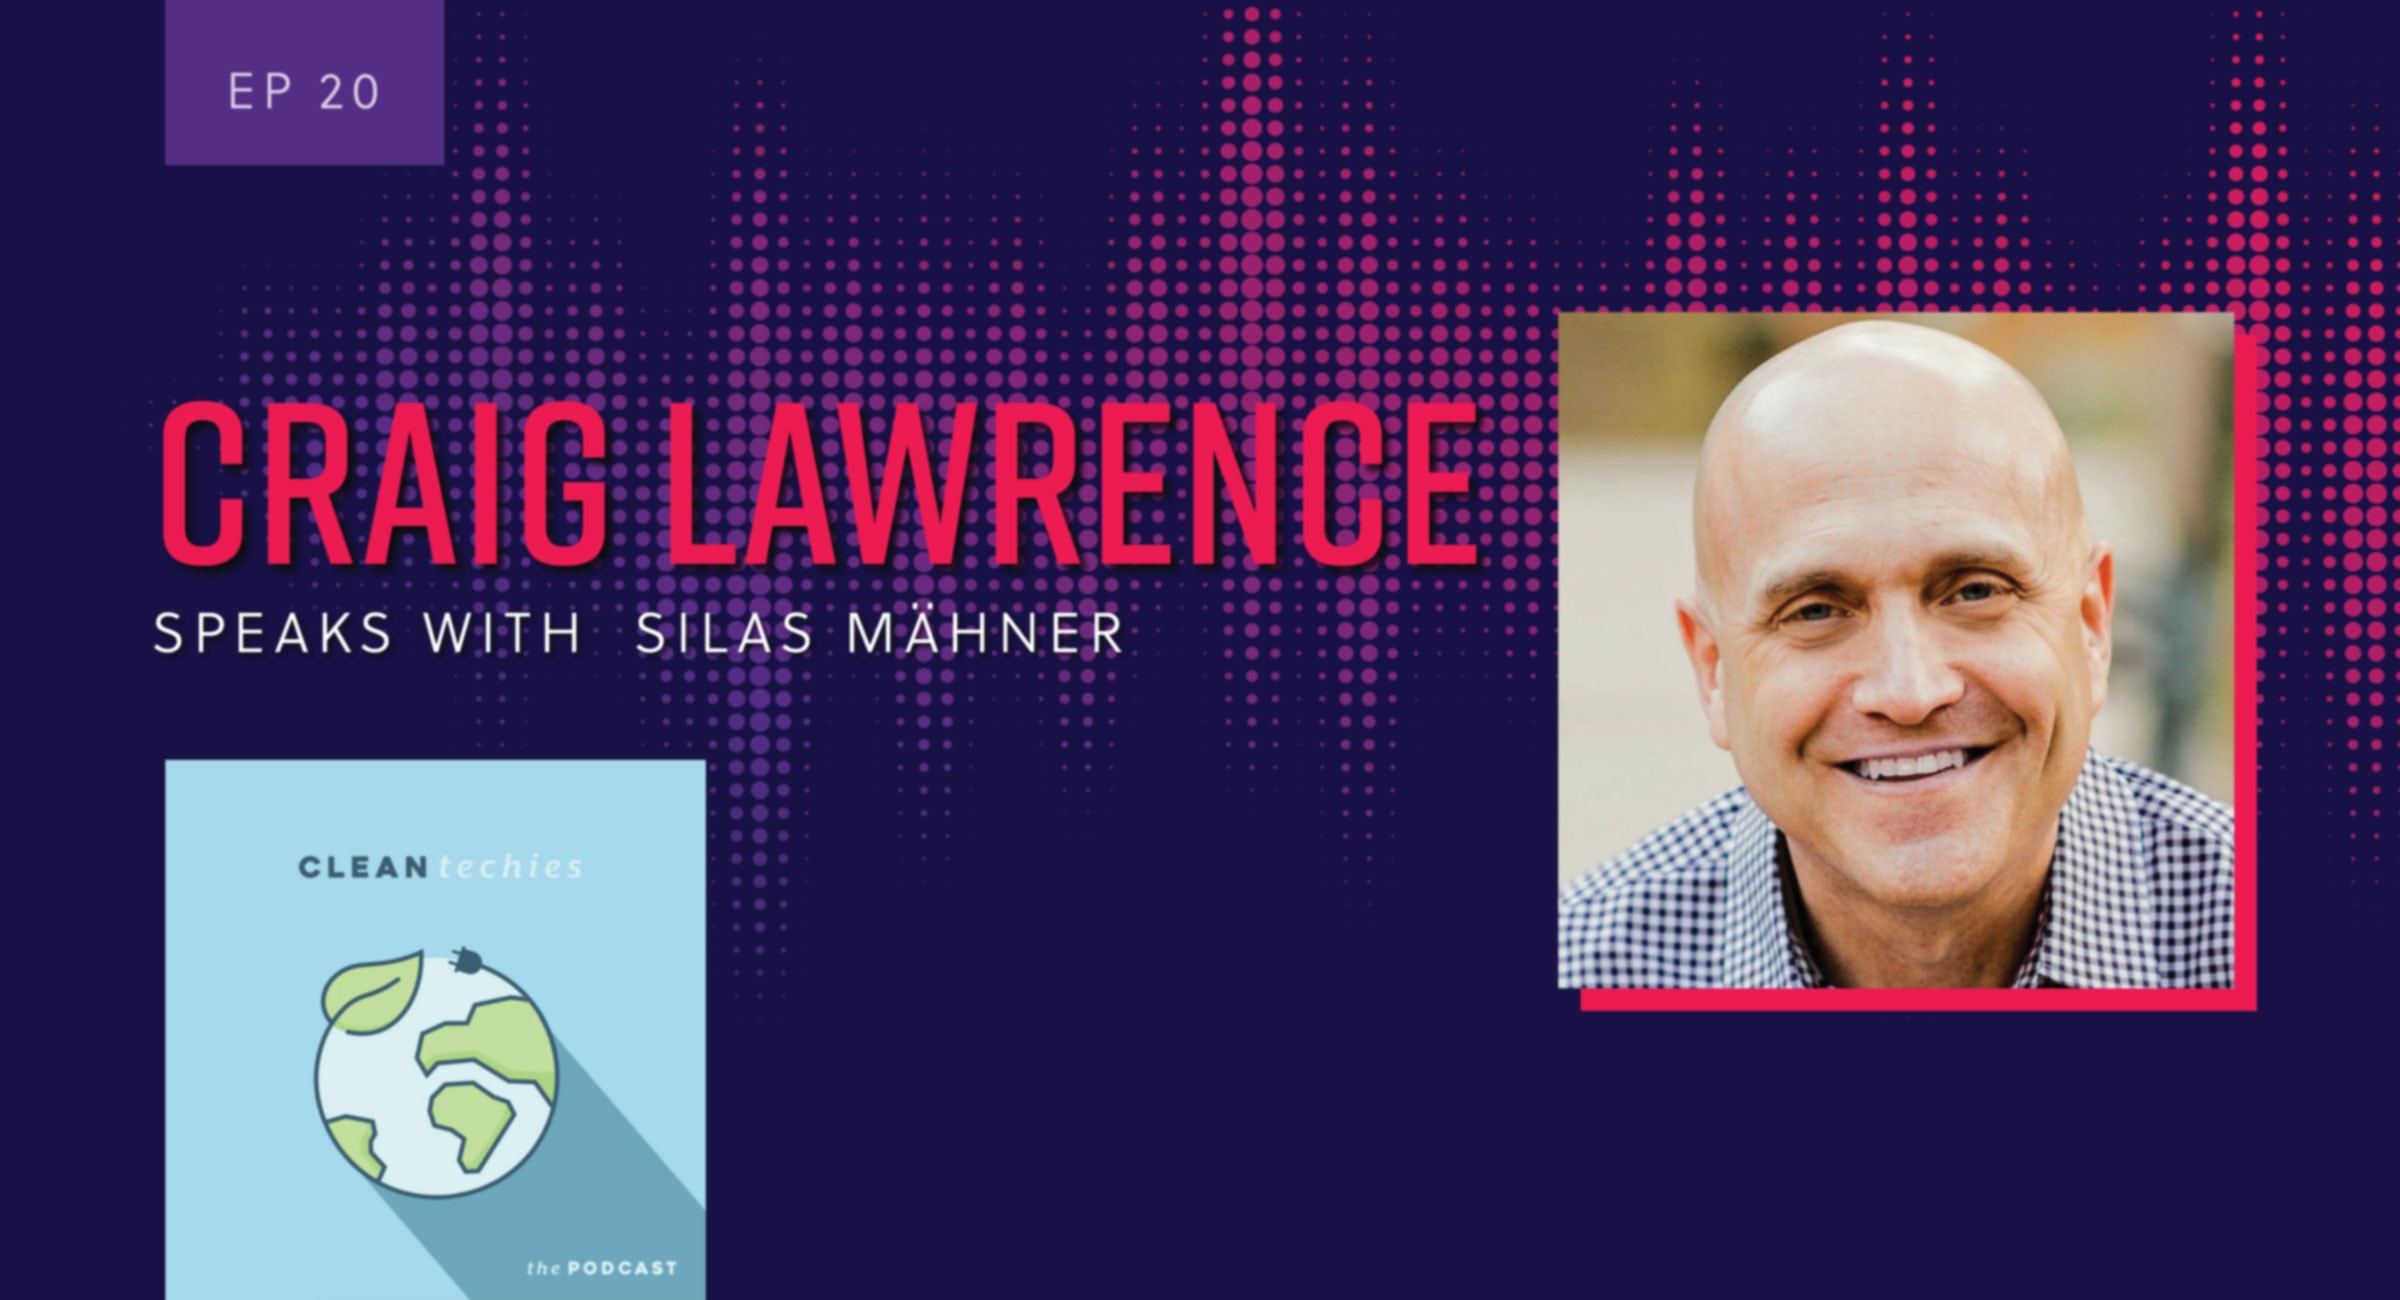 Craig Lawrence speaks with Silas Mähner on the CleanTechies Podcast